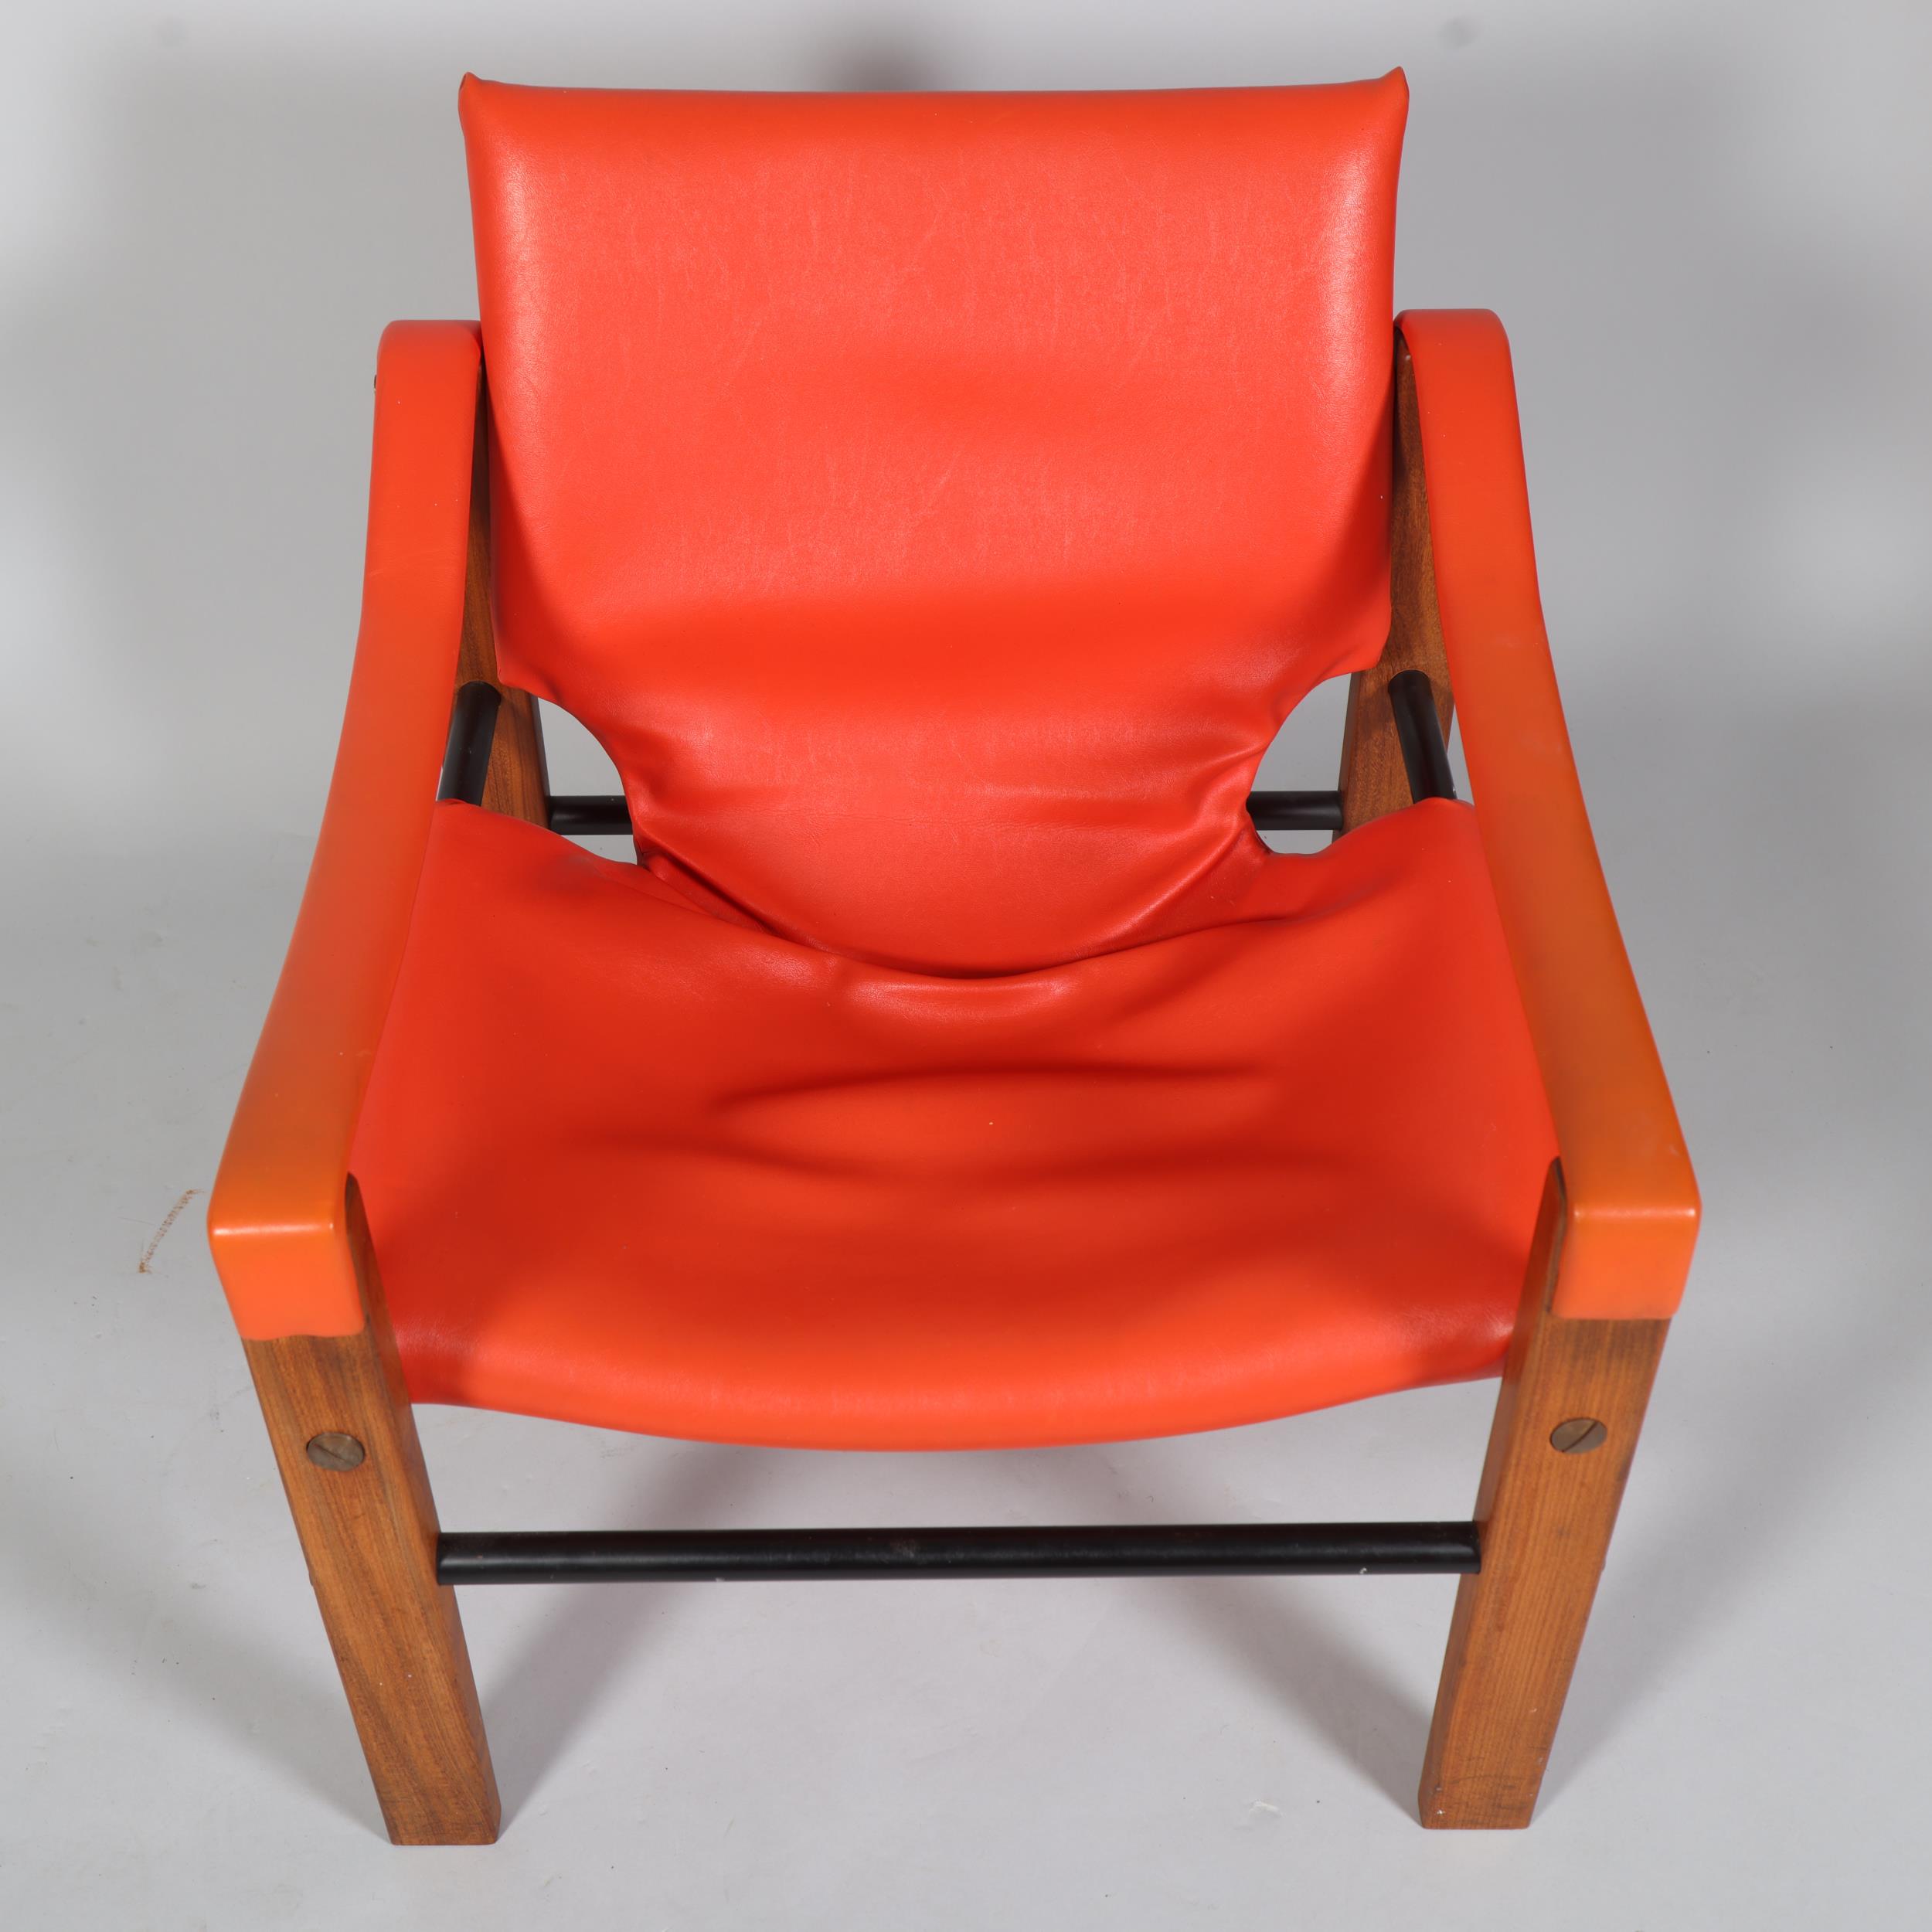 MAURICE BURKE for Arkana, a mid 20th century safari chair, red faux leather upholstery with hardwood - Image 2 of 4